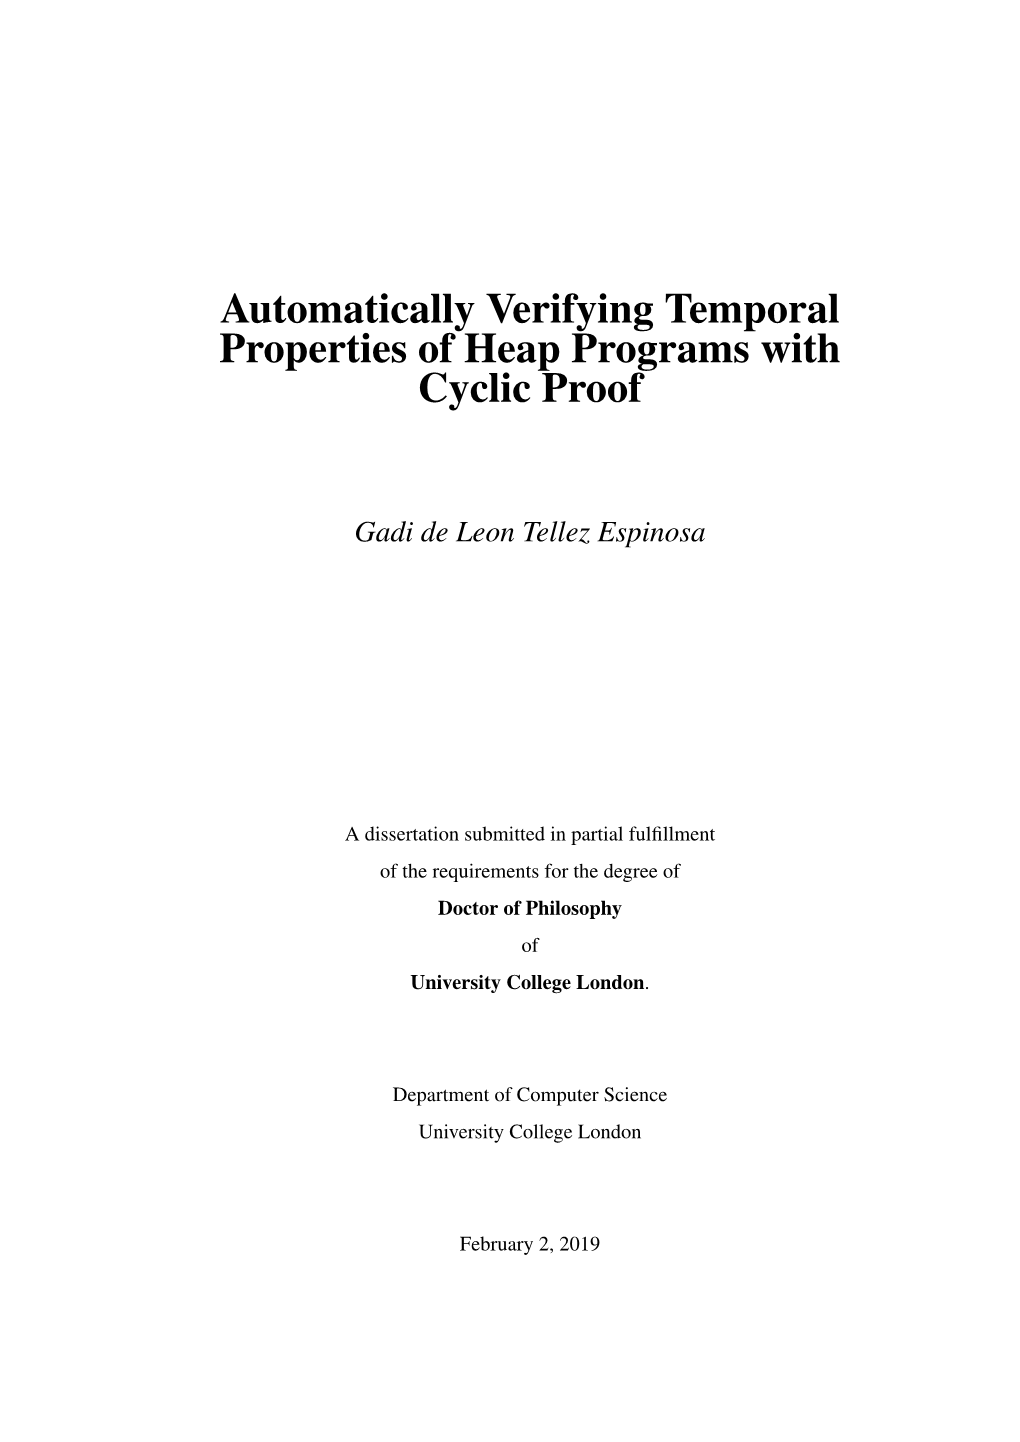 Automatically Verifying Temporal Properties of Heap Programs with Cyclic Proof